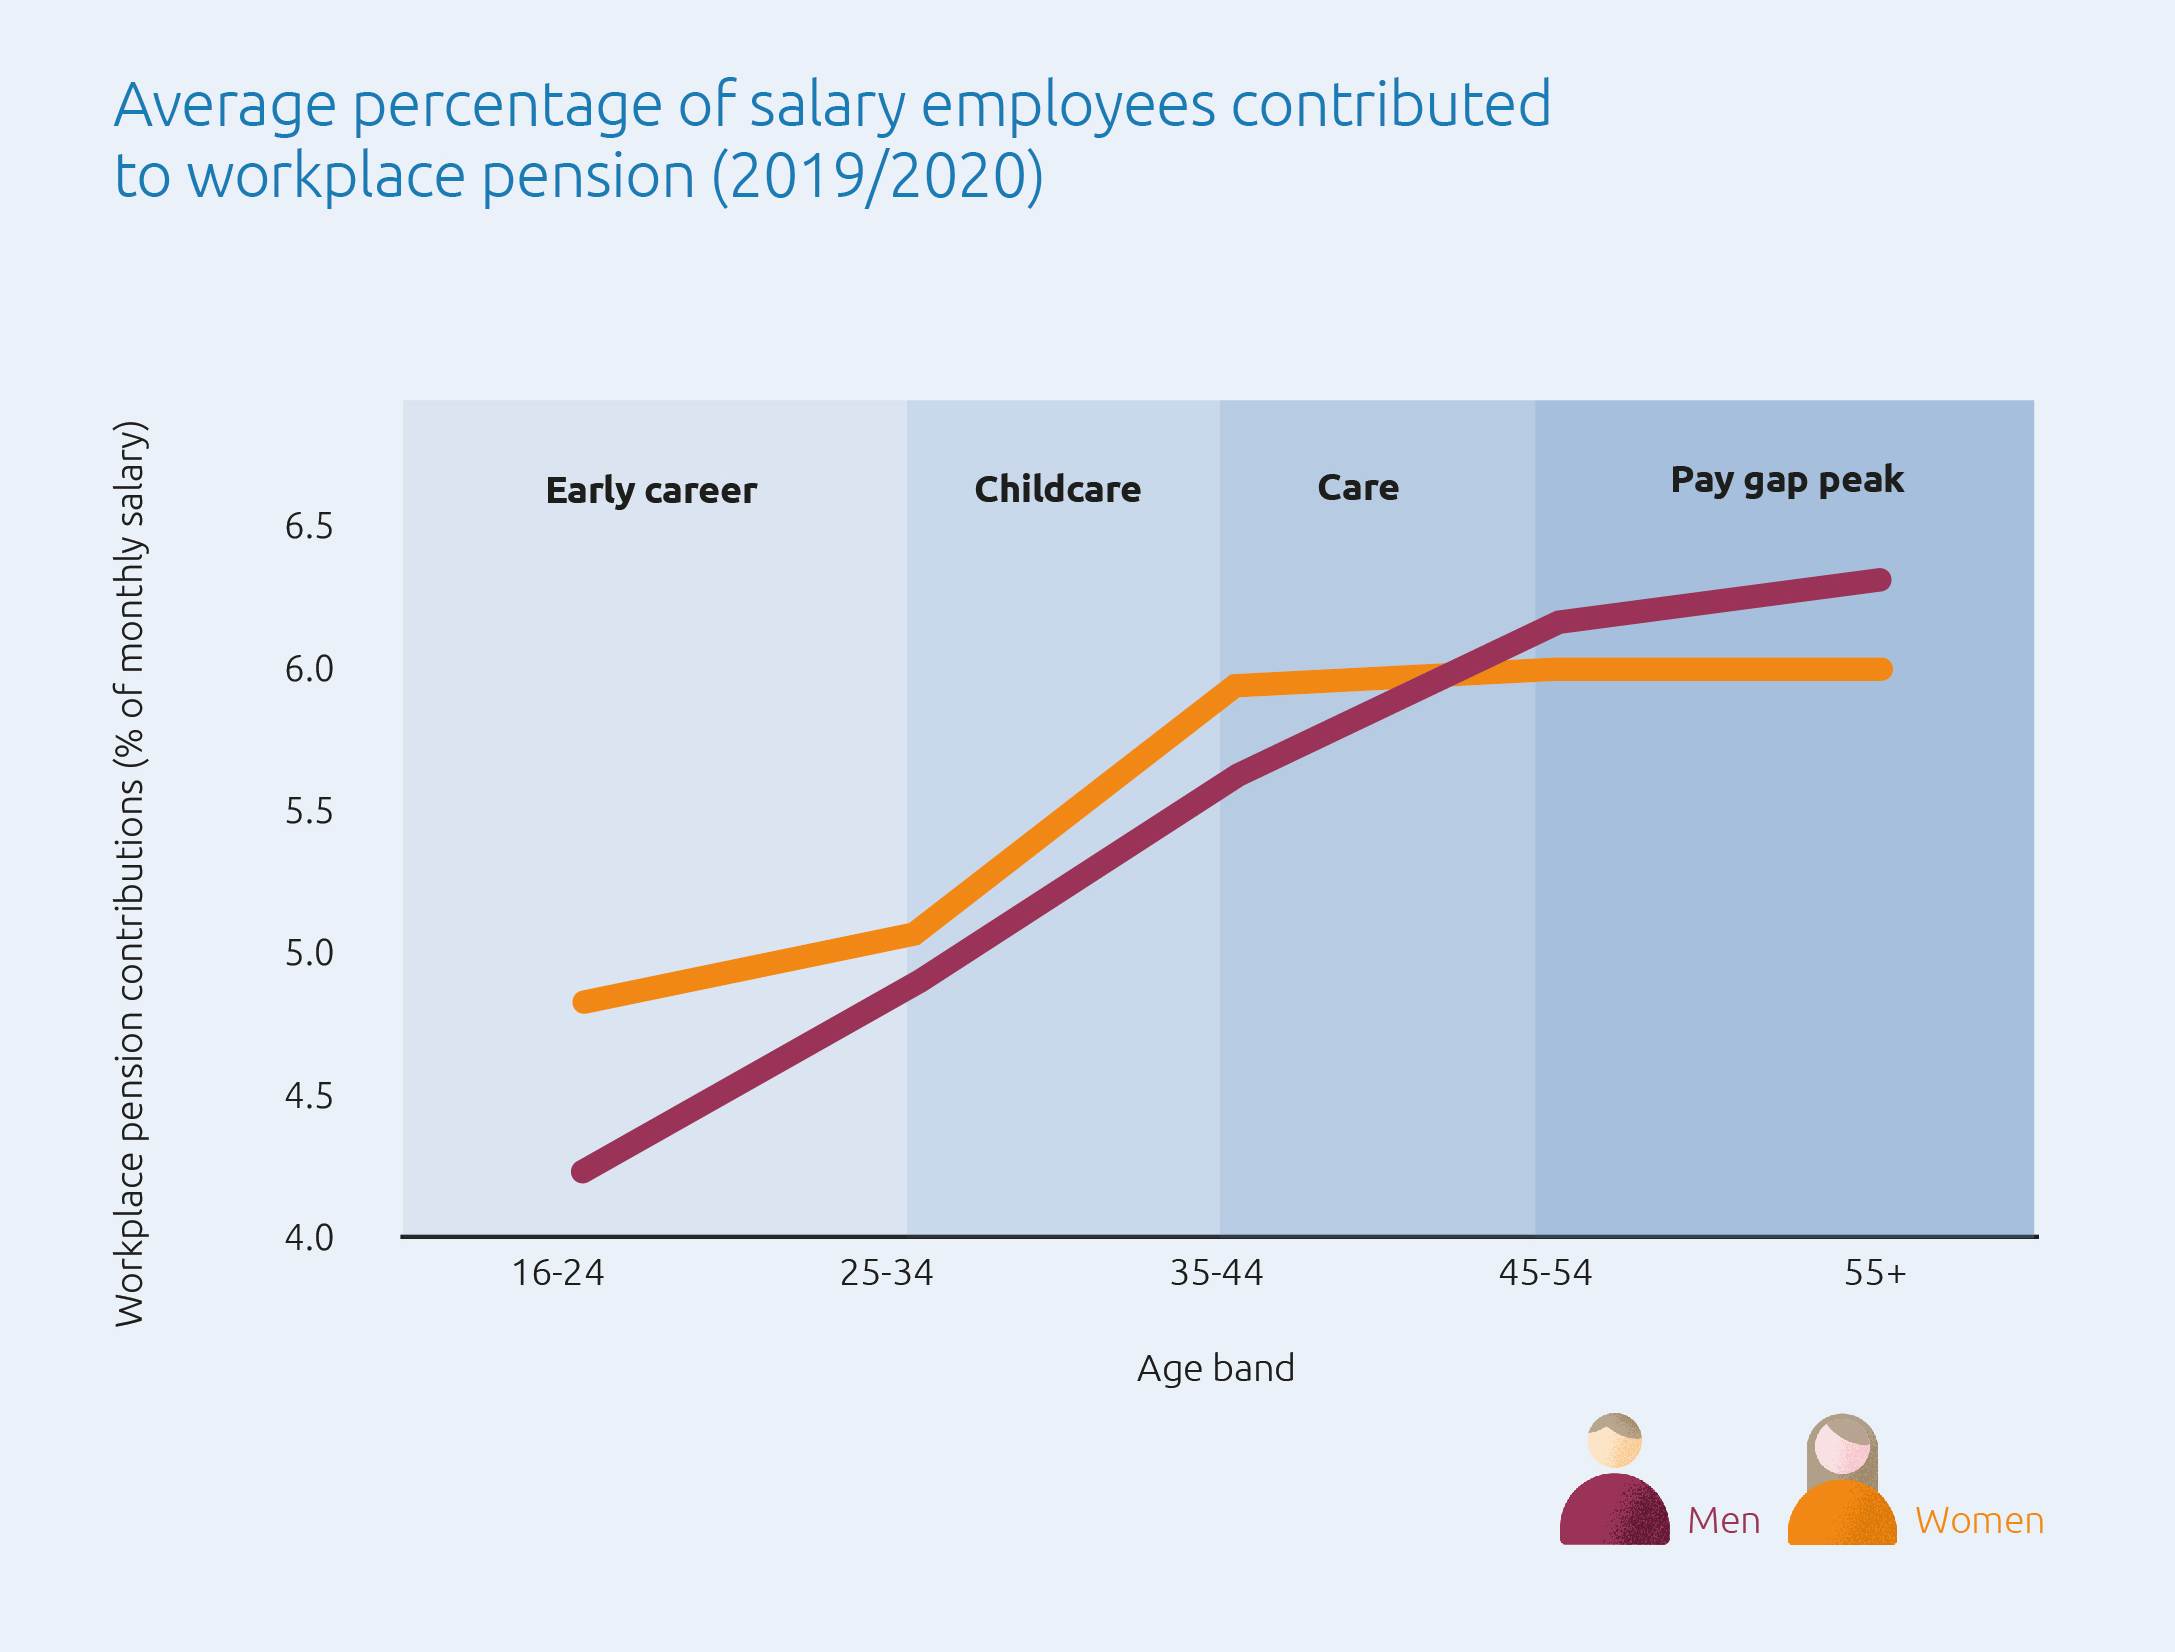 Chart showing average percentage of salary that employees contributed to workplace pension in 2019/2020 across age bands